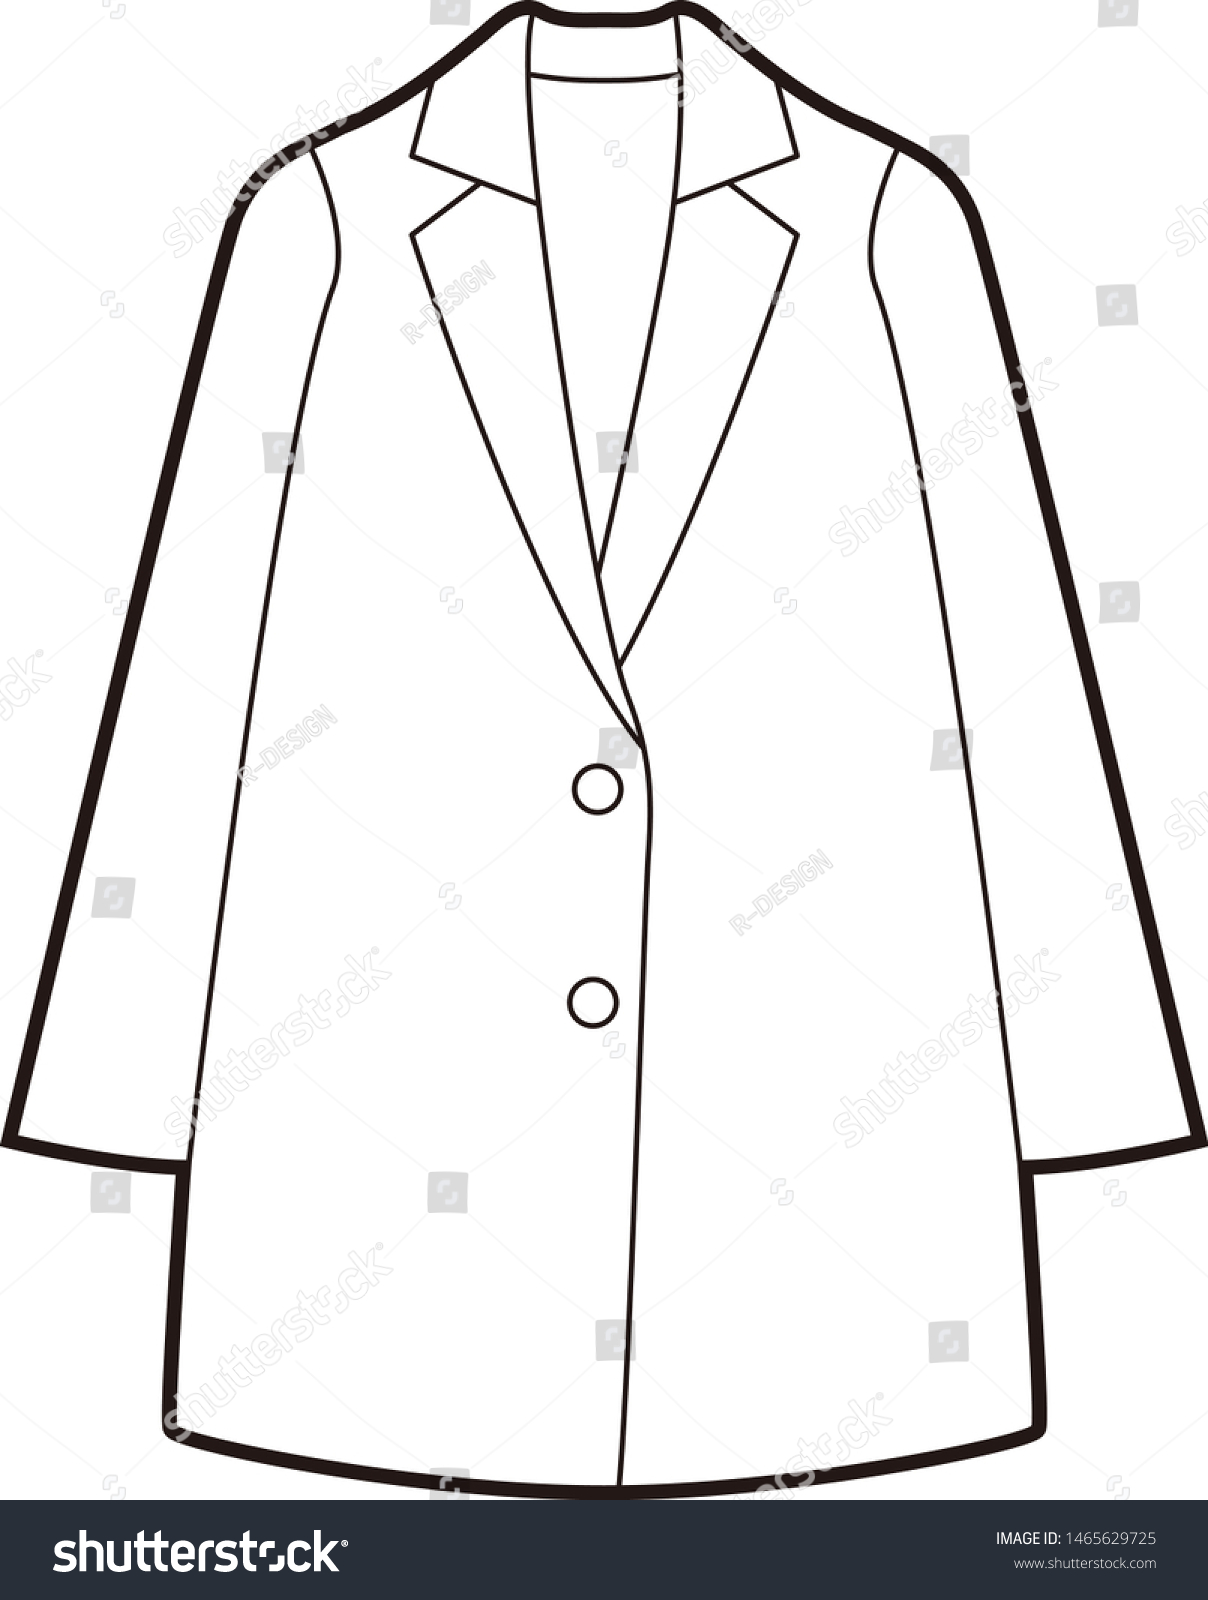 Illustration Line Drawing Clothes Stock Vector (Royalty Free ...